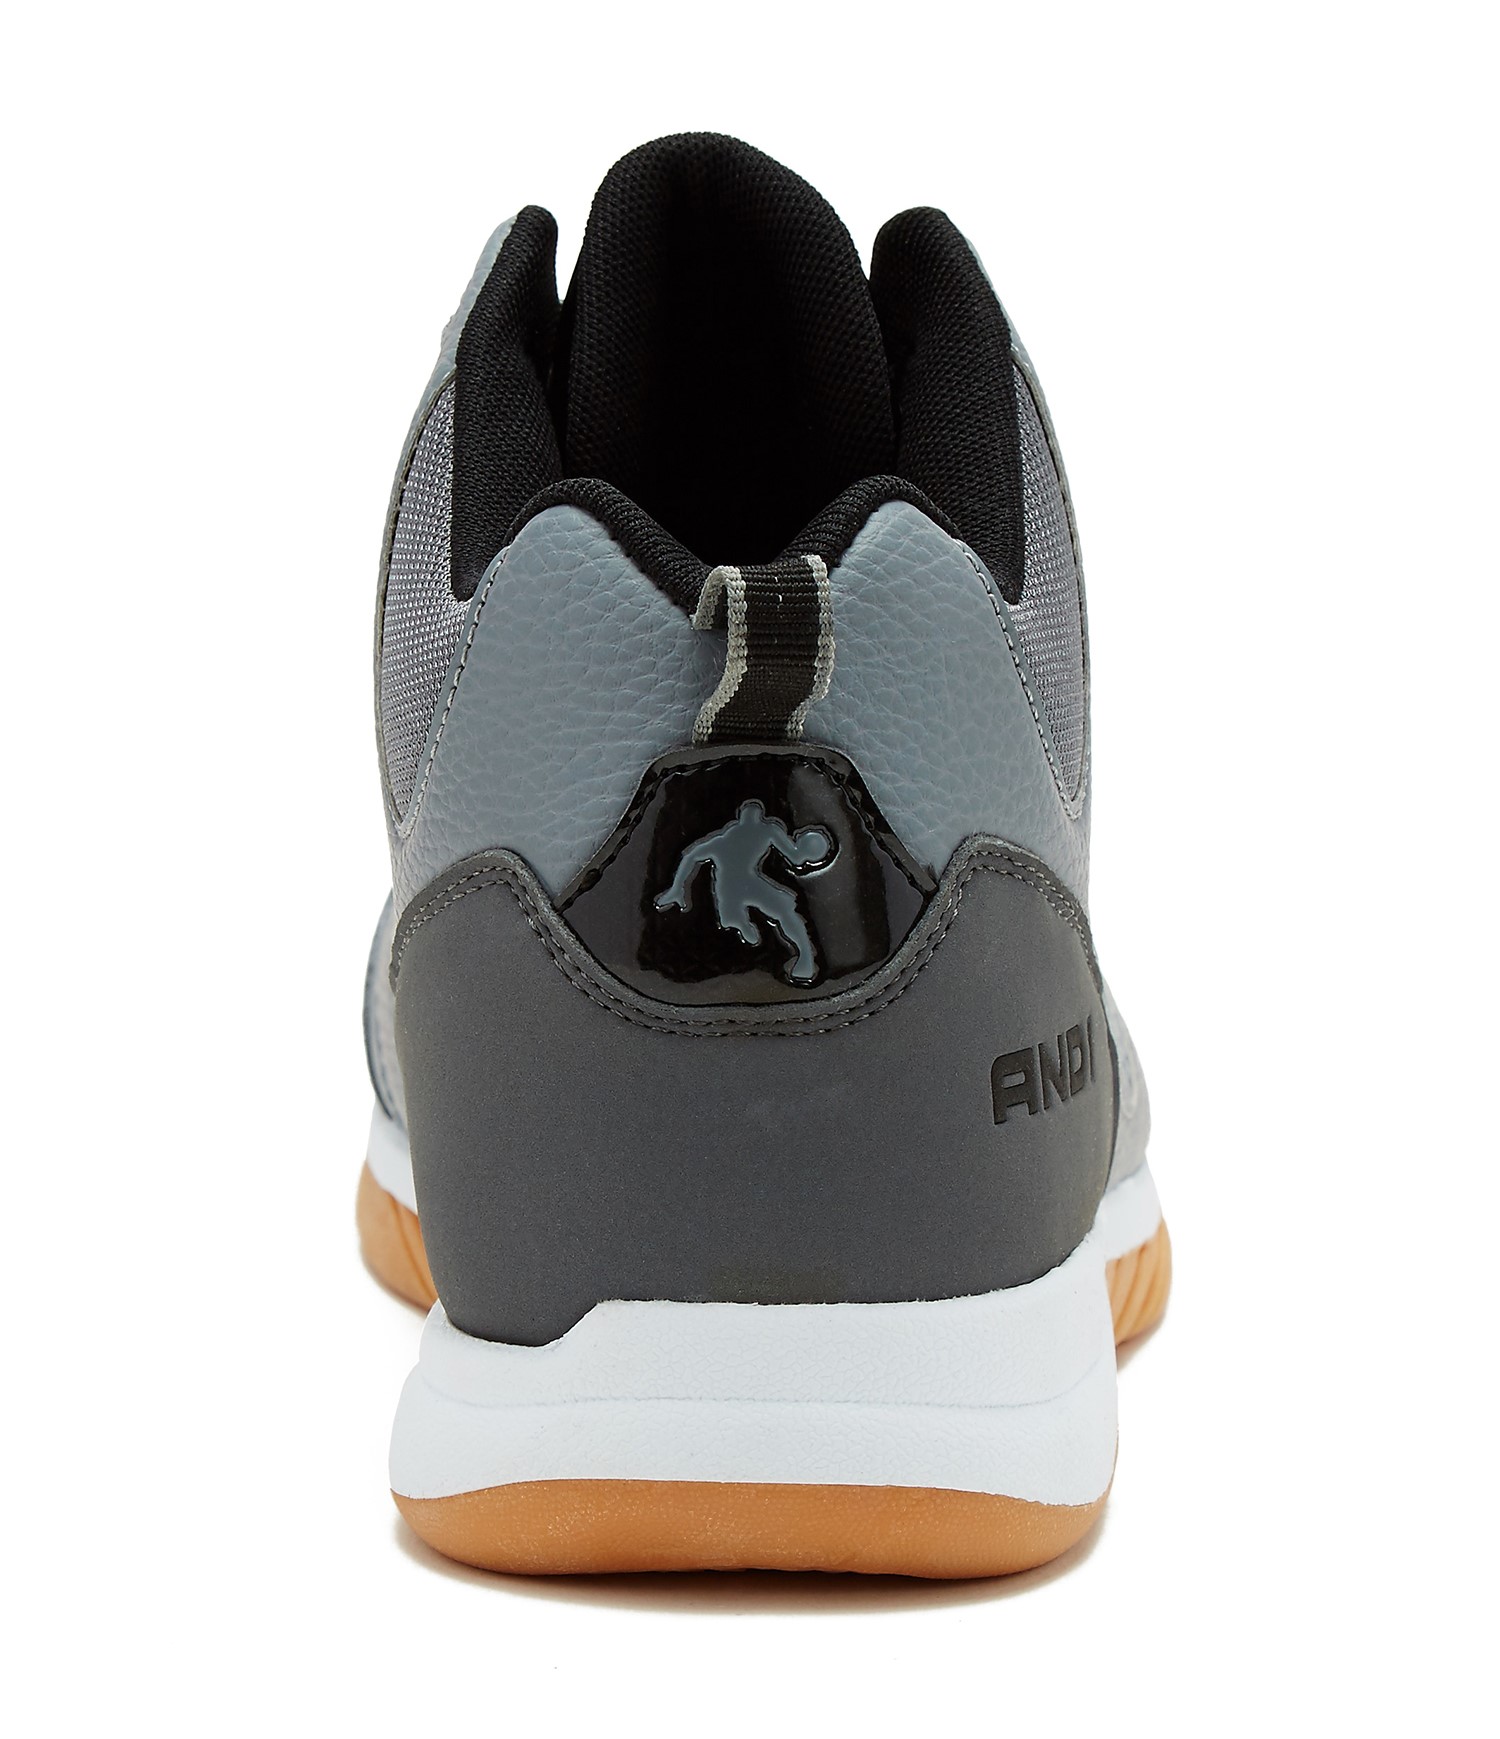 AND1 Men's Capital 2.0 Athletic Shoe - image 3 of 4